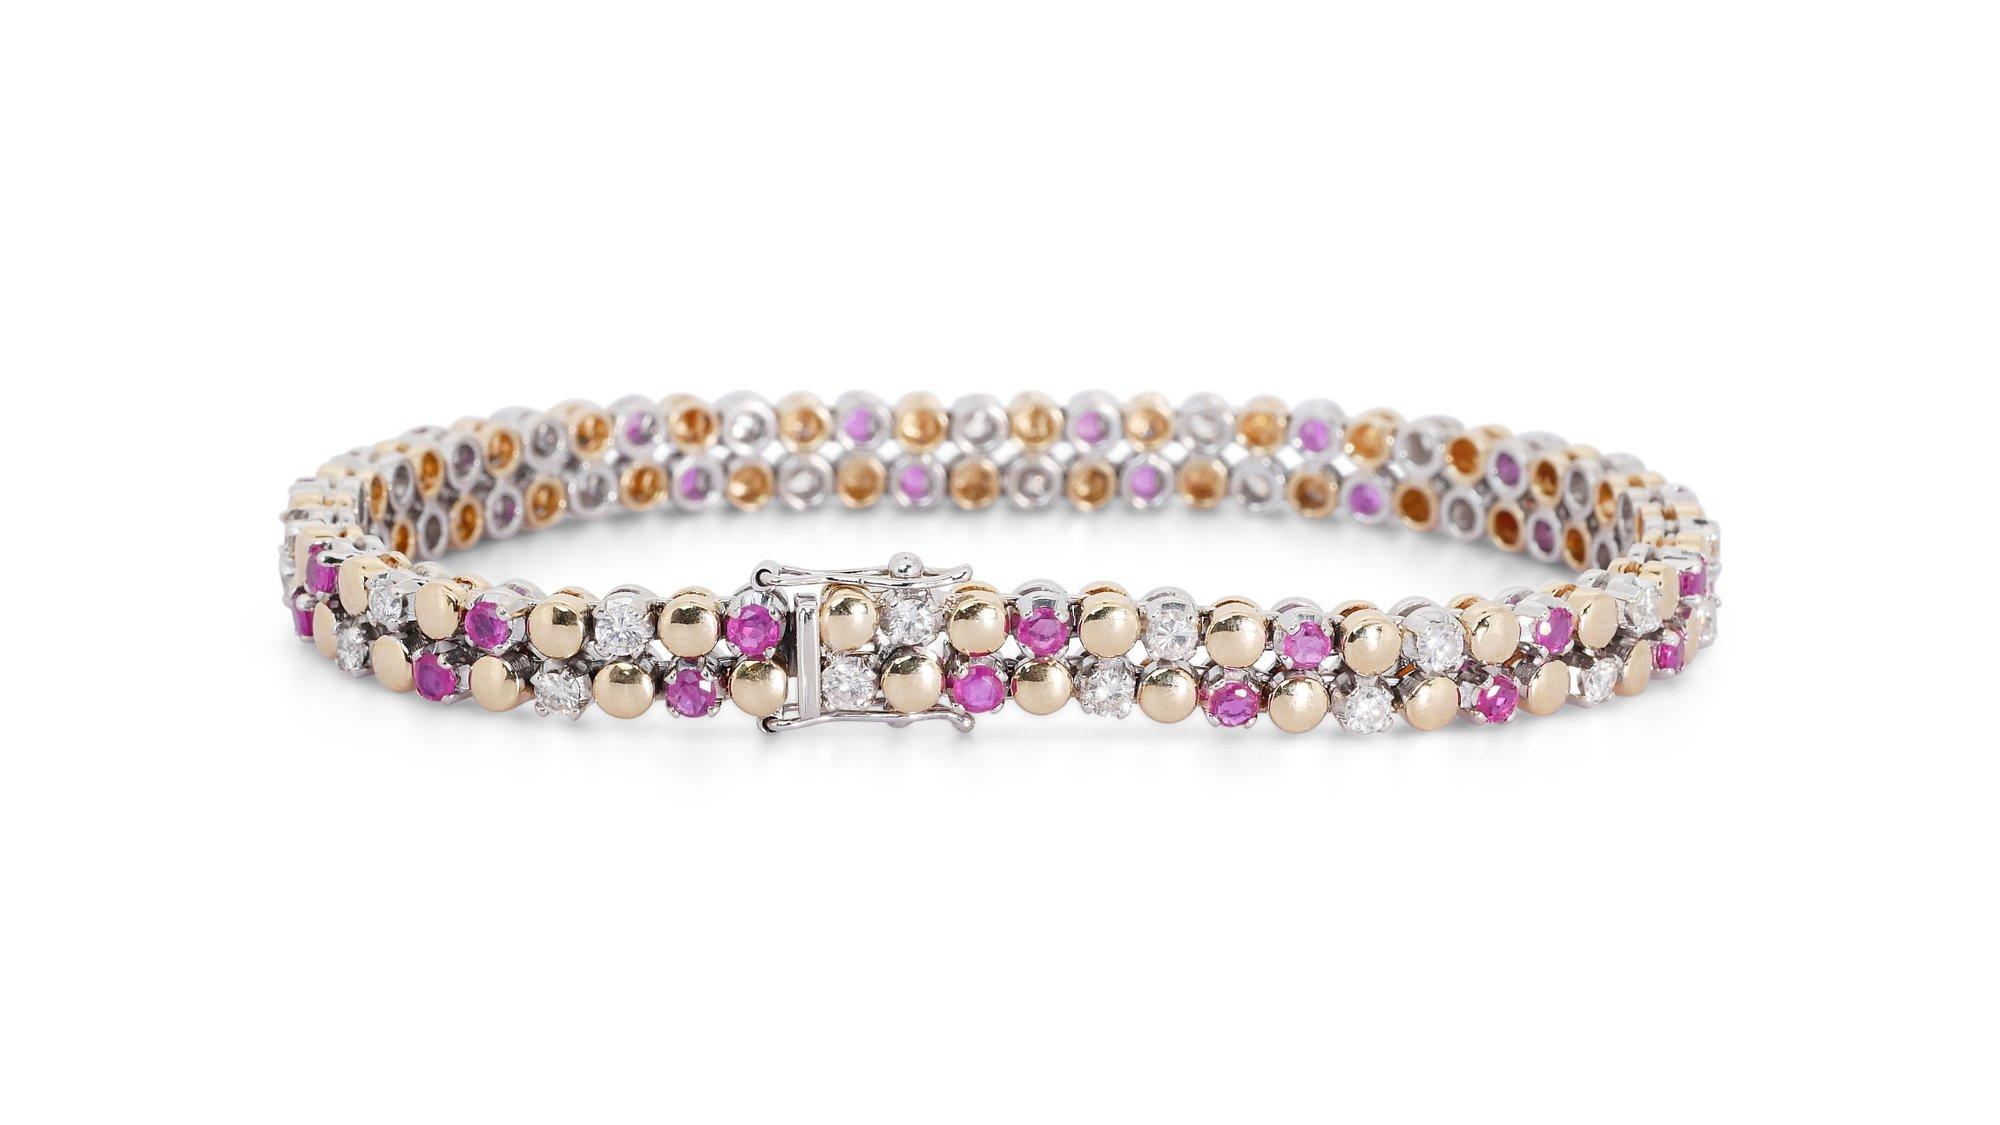 Women's Colorful 18K White Gold Bracelet w/ 2.7 ct Ruby and Natural Diamonds IGI Cert For Sale